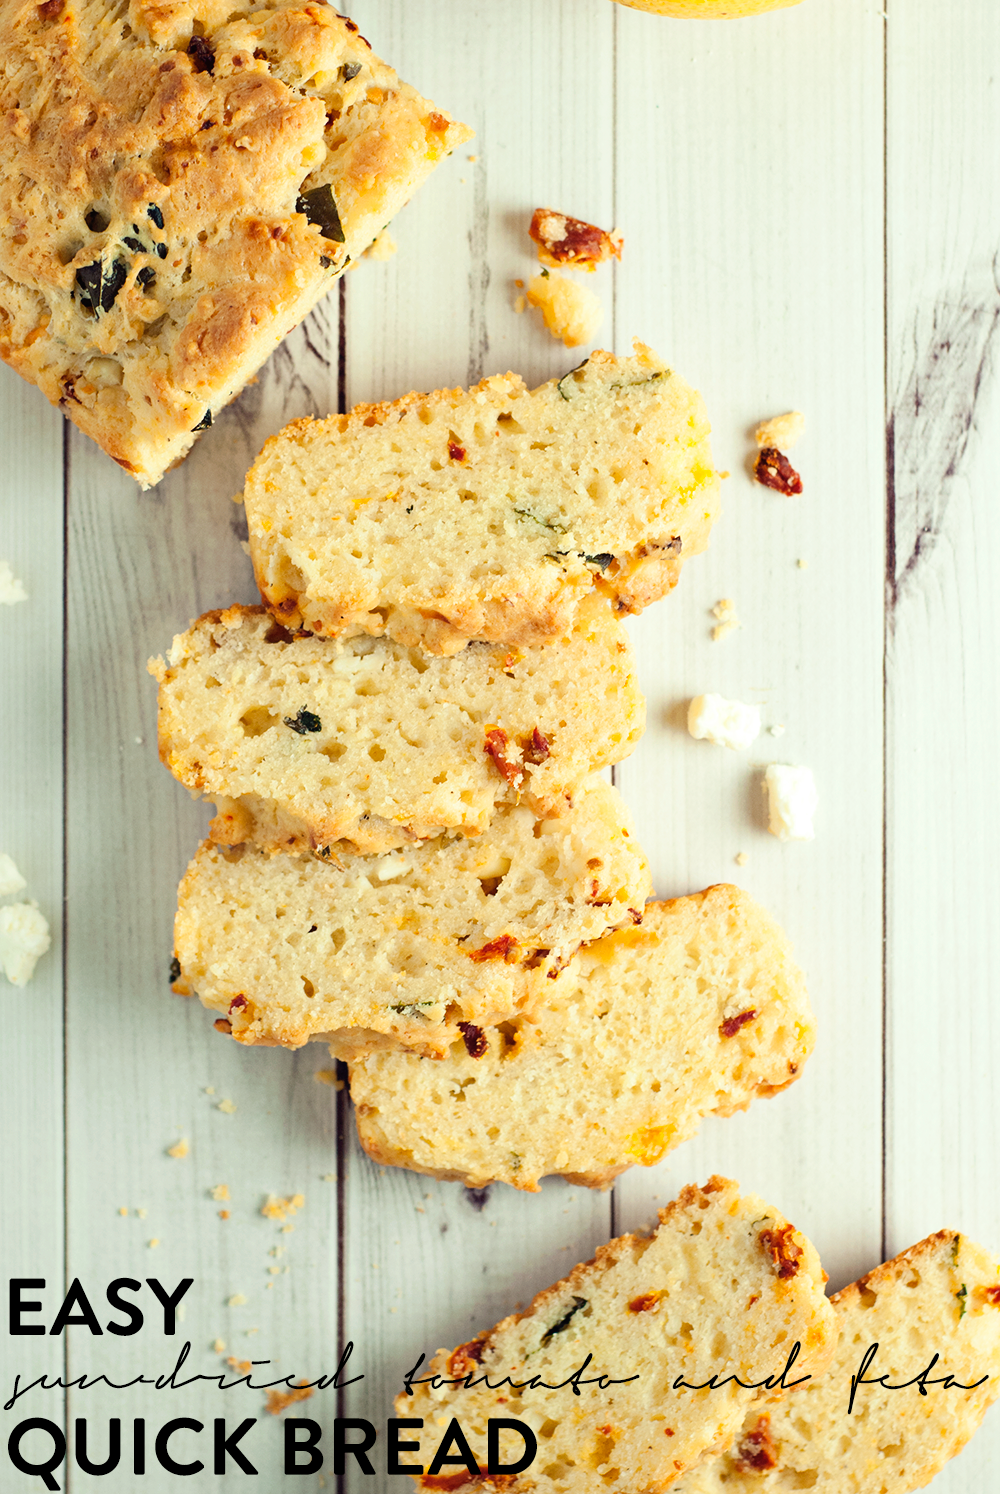 This easy sun-dried tomato and feta quick bread is ready in just 30 minutes, so get ready to nosh on some amazing flavor today!